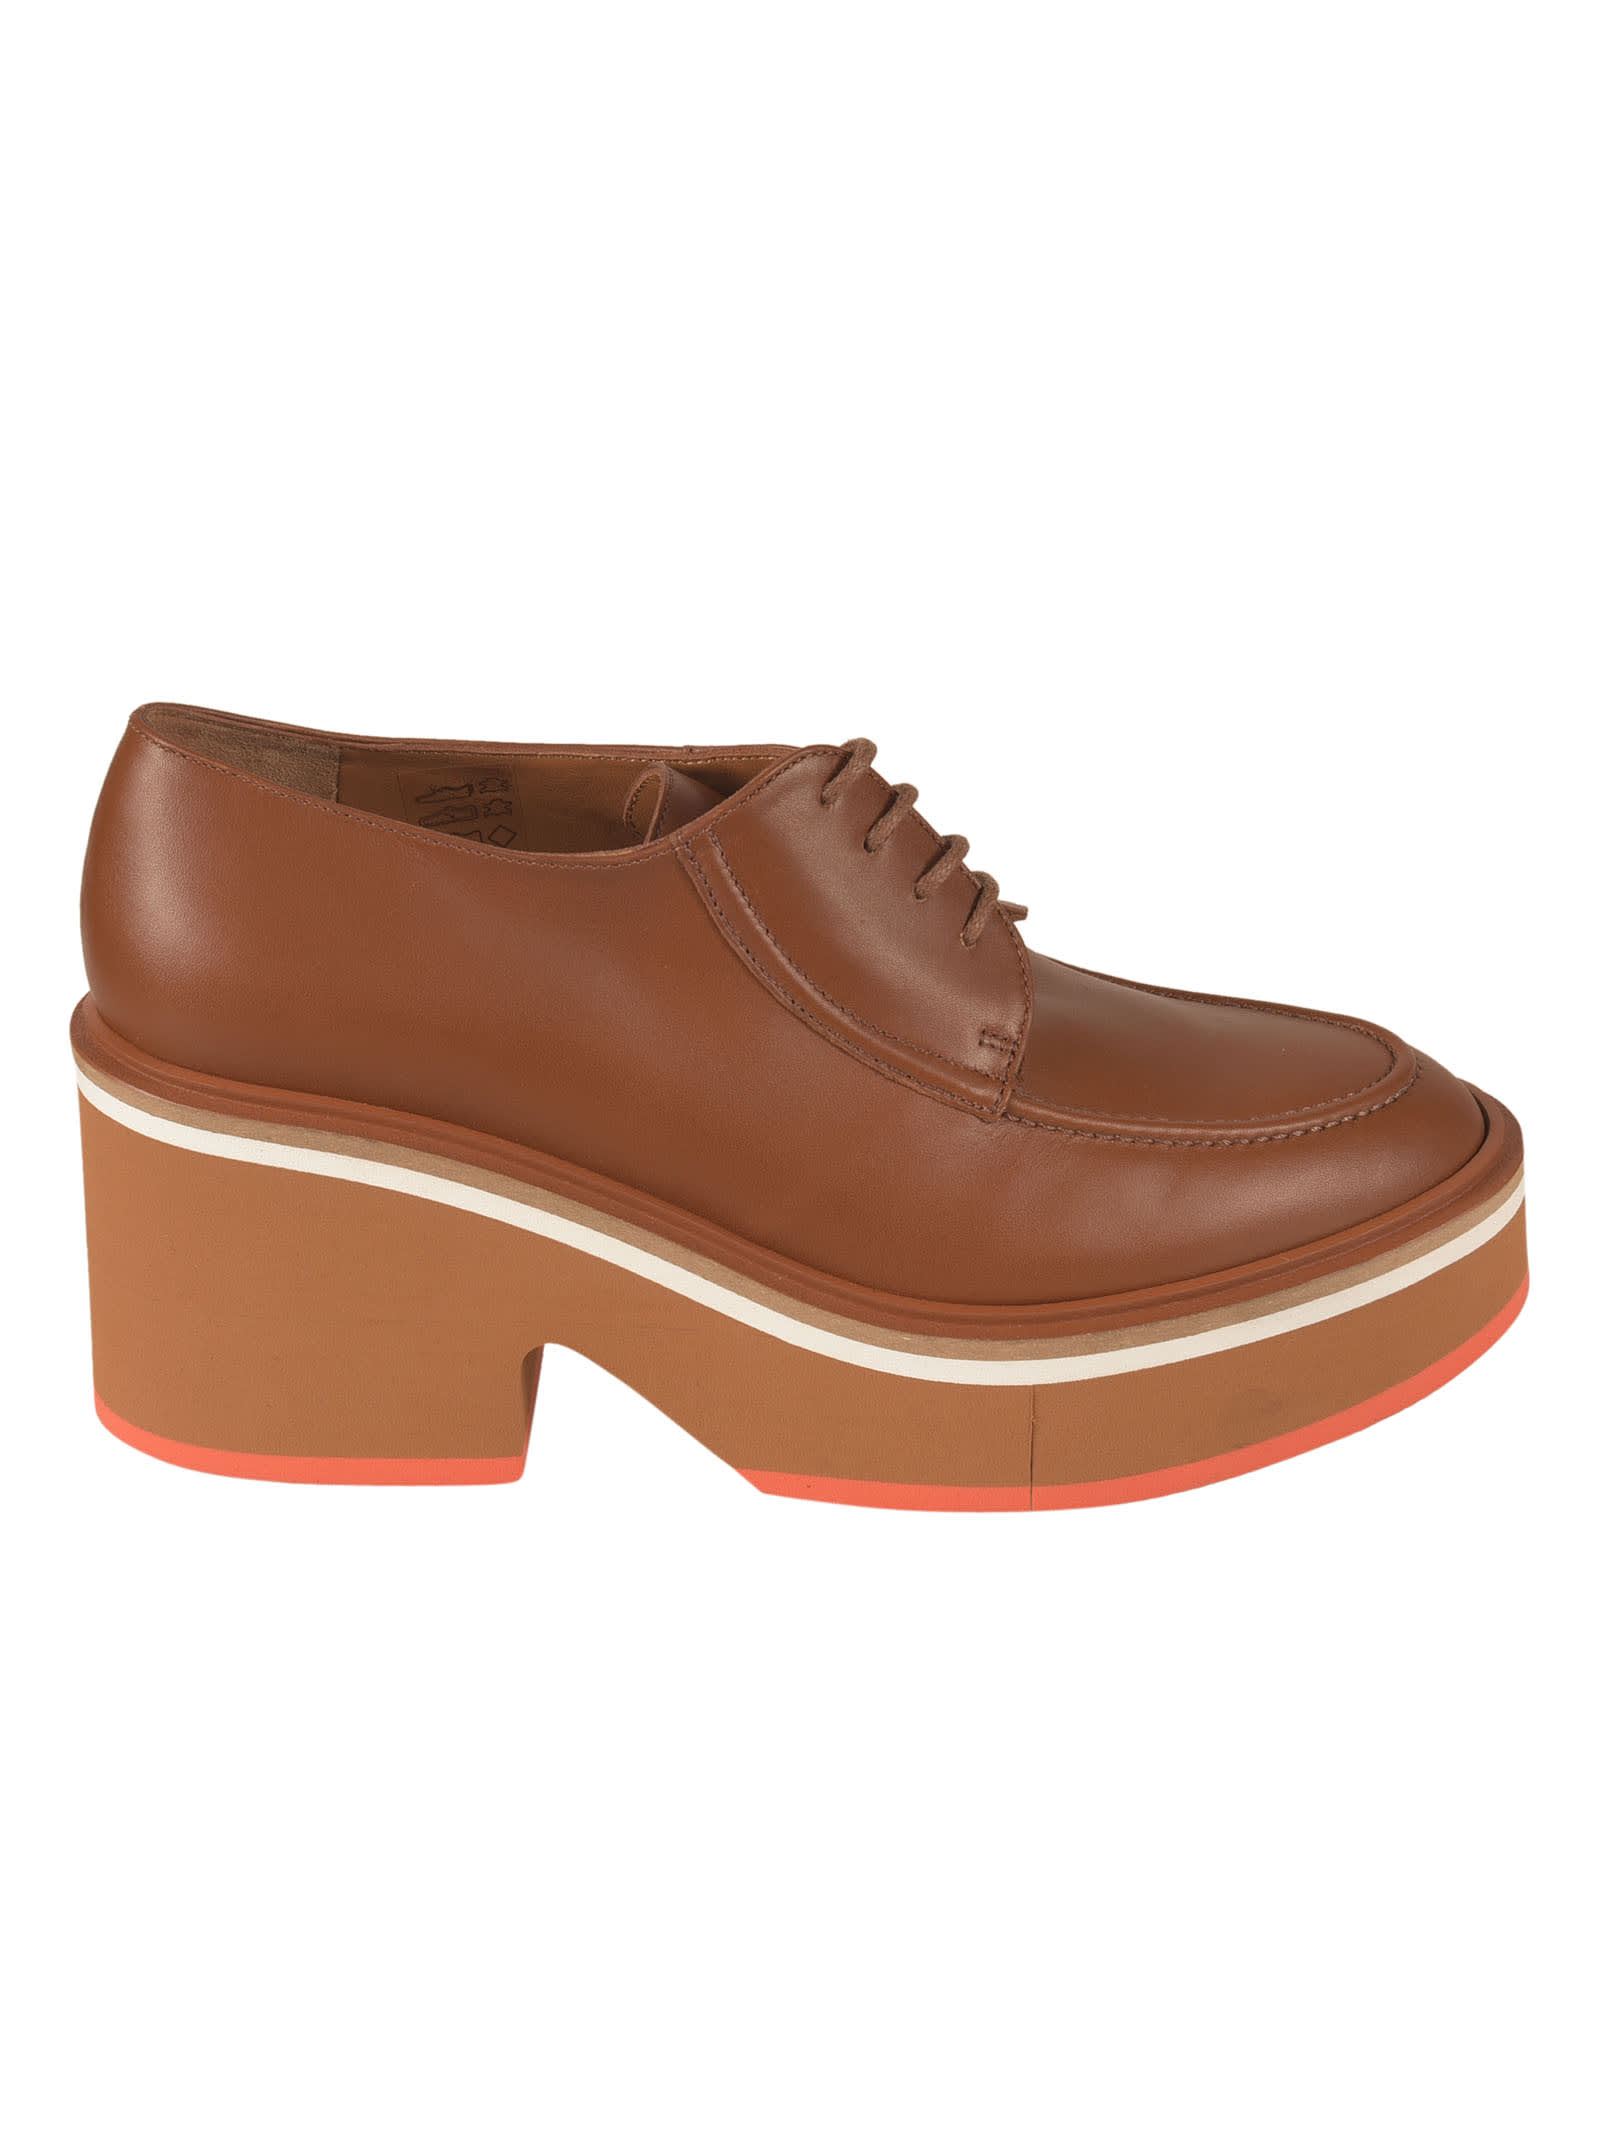 Clergerie Anja Wedge Oxford Shoes